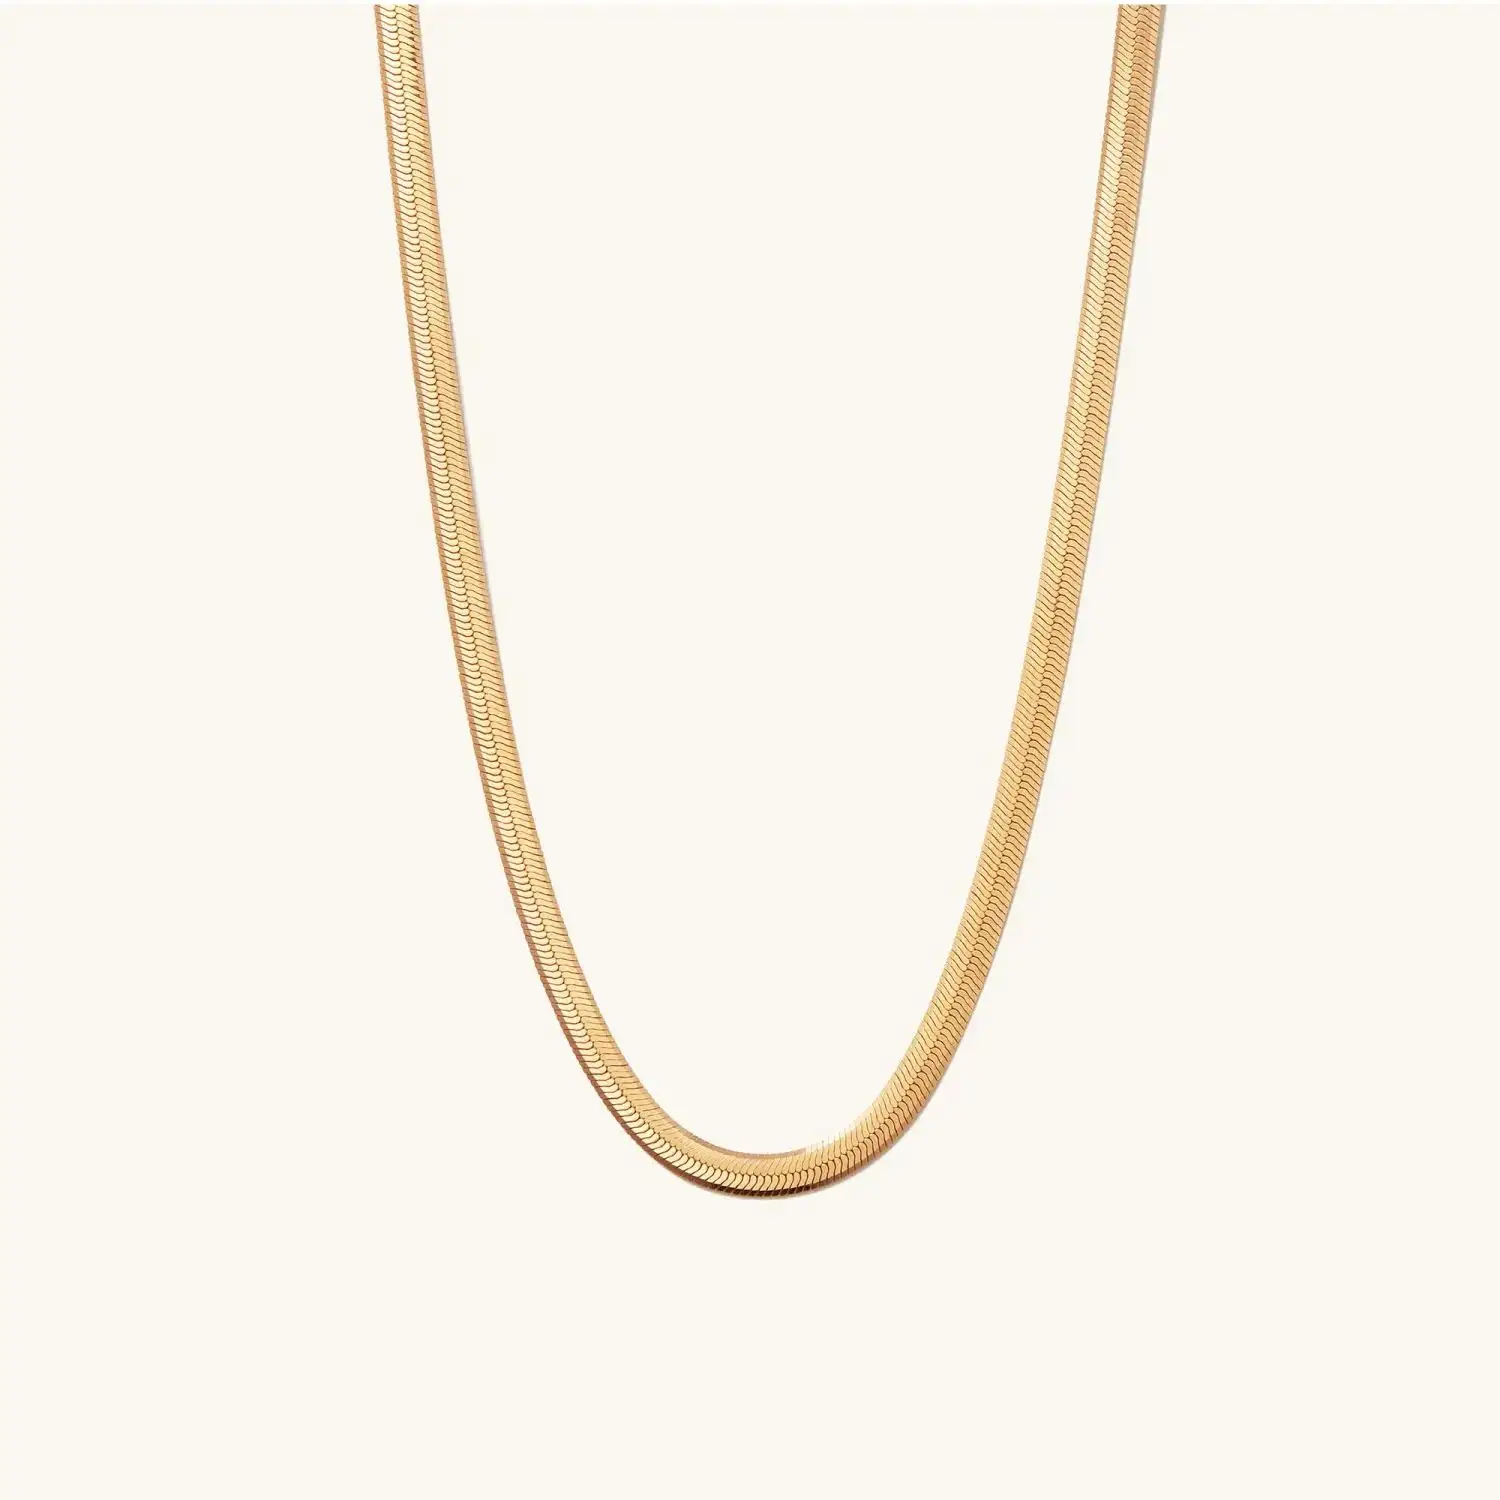 18k Gold Plated Jewelry 14K Gold Plated Bold Herringbone Chain Necklace Snake Chain Choker Necklaces For Women Girl